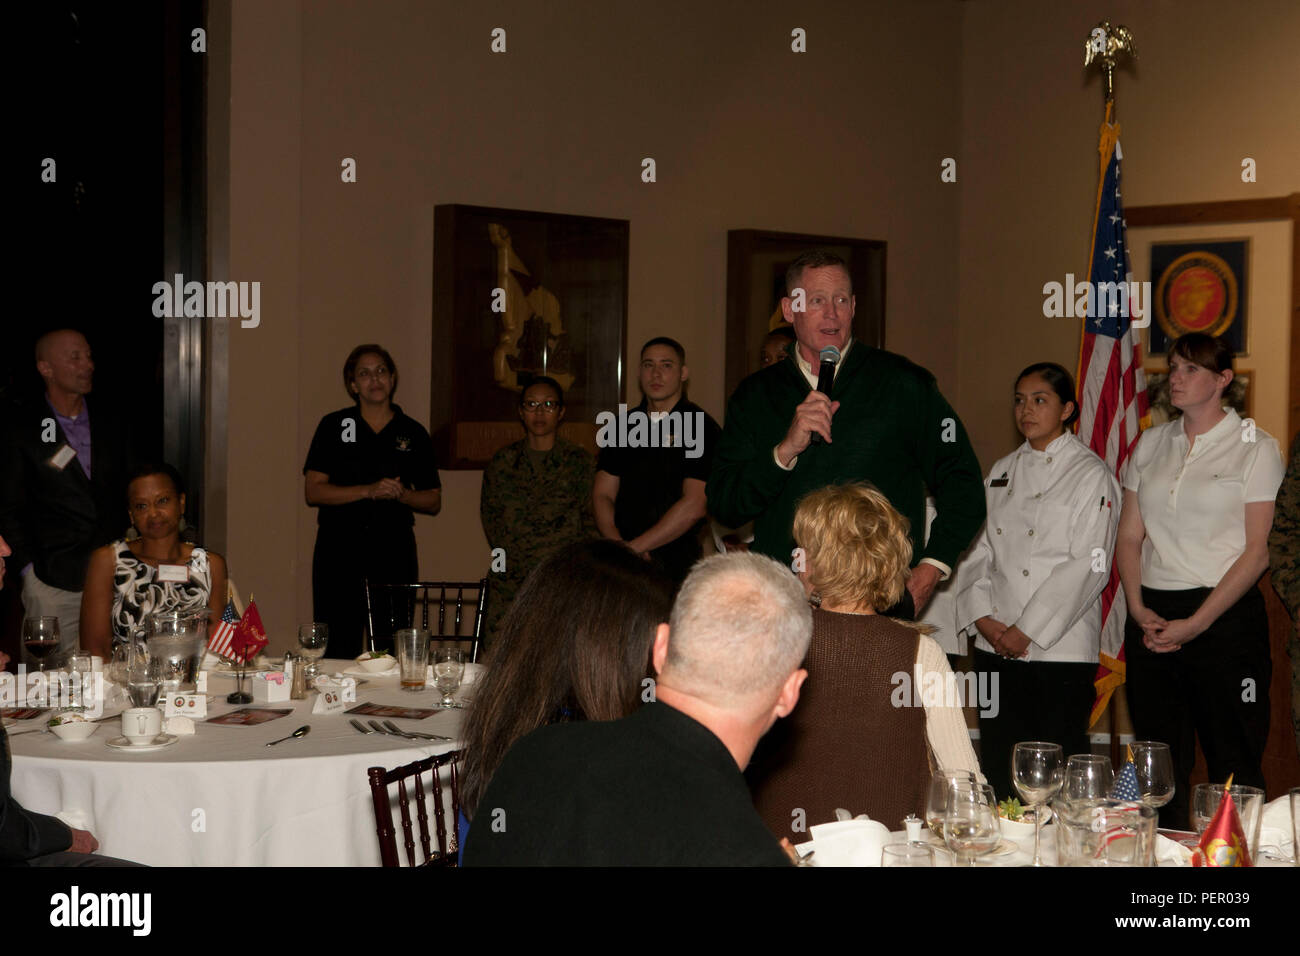 U.S. Marine Corps Brig. Gen. Edward Banta, Camp Pendleton and MCIWEST Commanding General speaks with honored guests at the conclusion of the Food Industry Feeding Heroes (FISH) dinner, at Iron Mike's lounge on Camp Pendleton, Calif., Jan 21, 2016. The event is hosted by Camp Pendleton and MCIWEST Commanding General, Brig. Gen. Edward Banta, and Mr. Paul Chapa to honor service members for their accomplishments and sacrifices. (U.S. Marine Corps photo by Cpl. Brian Bekkala/MCIWEST-MCB CamPen Combat Camera/Released) Stock Photo